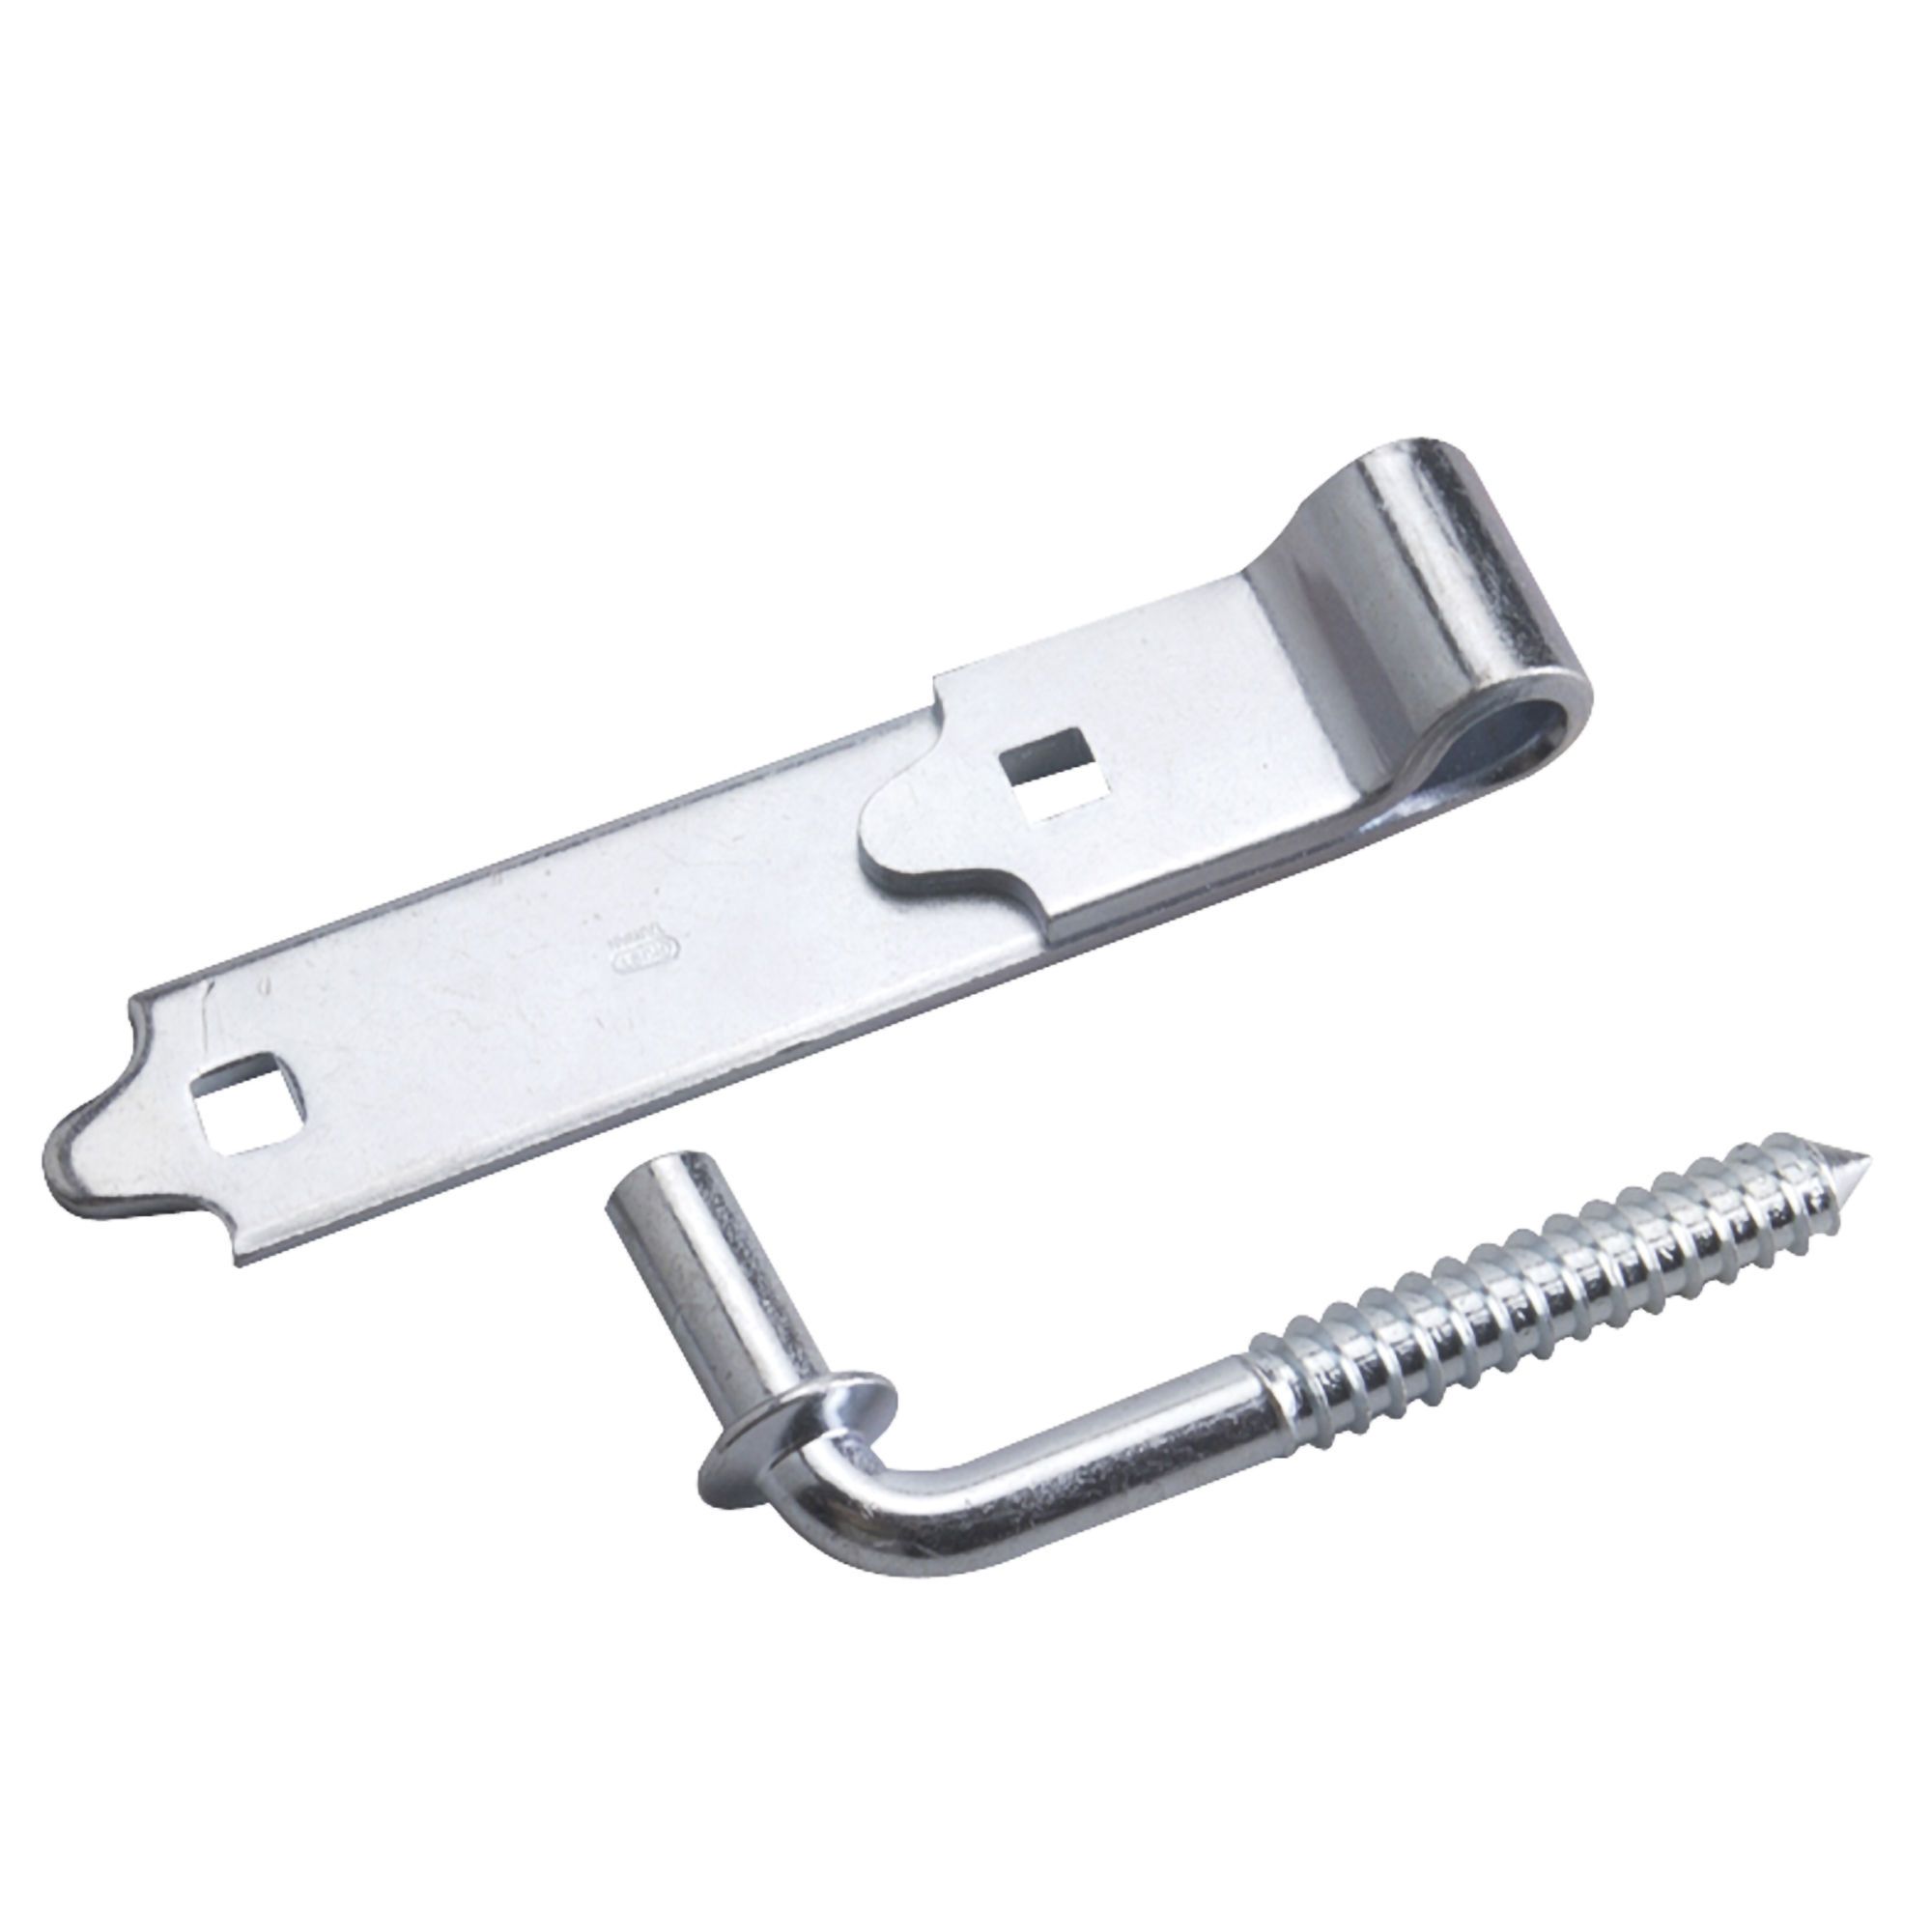 Screw hook and strap hinge from RICHELIEU